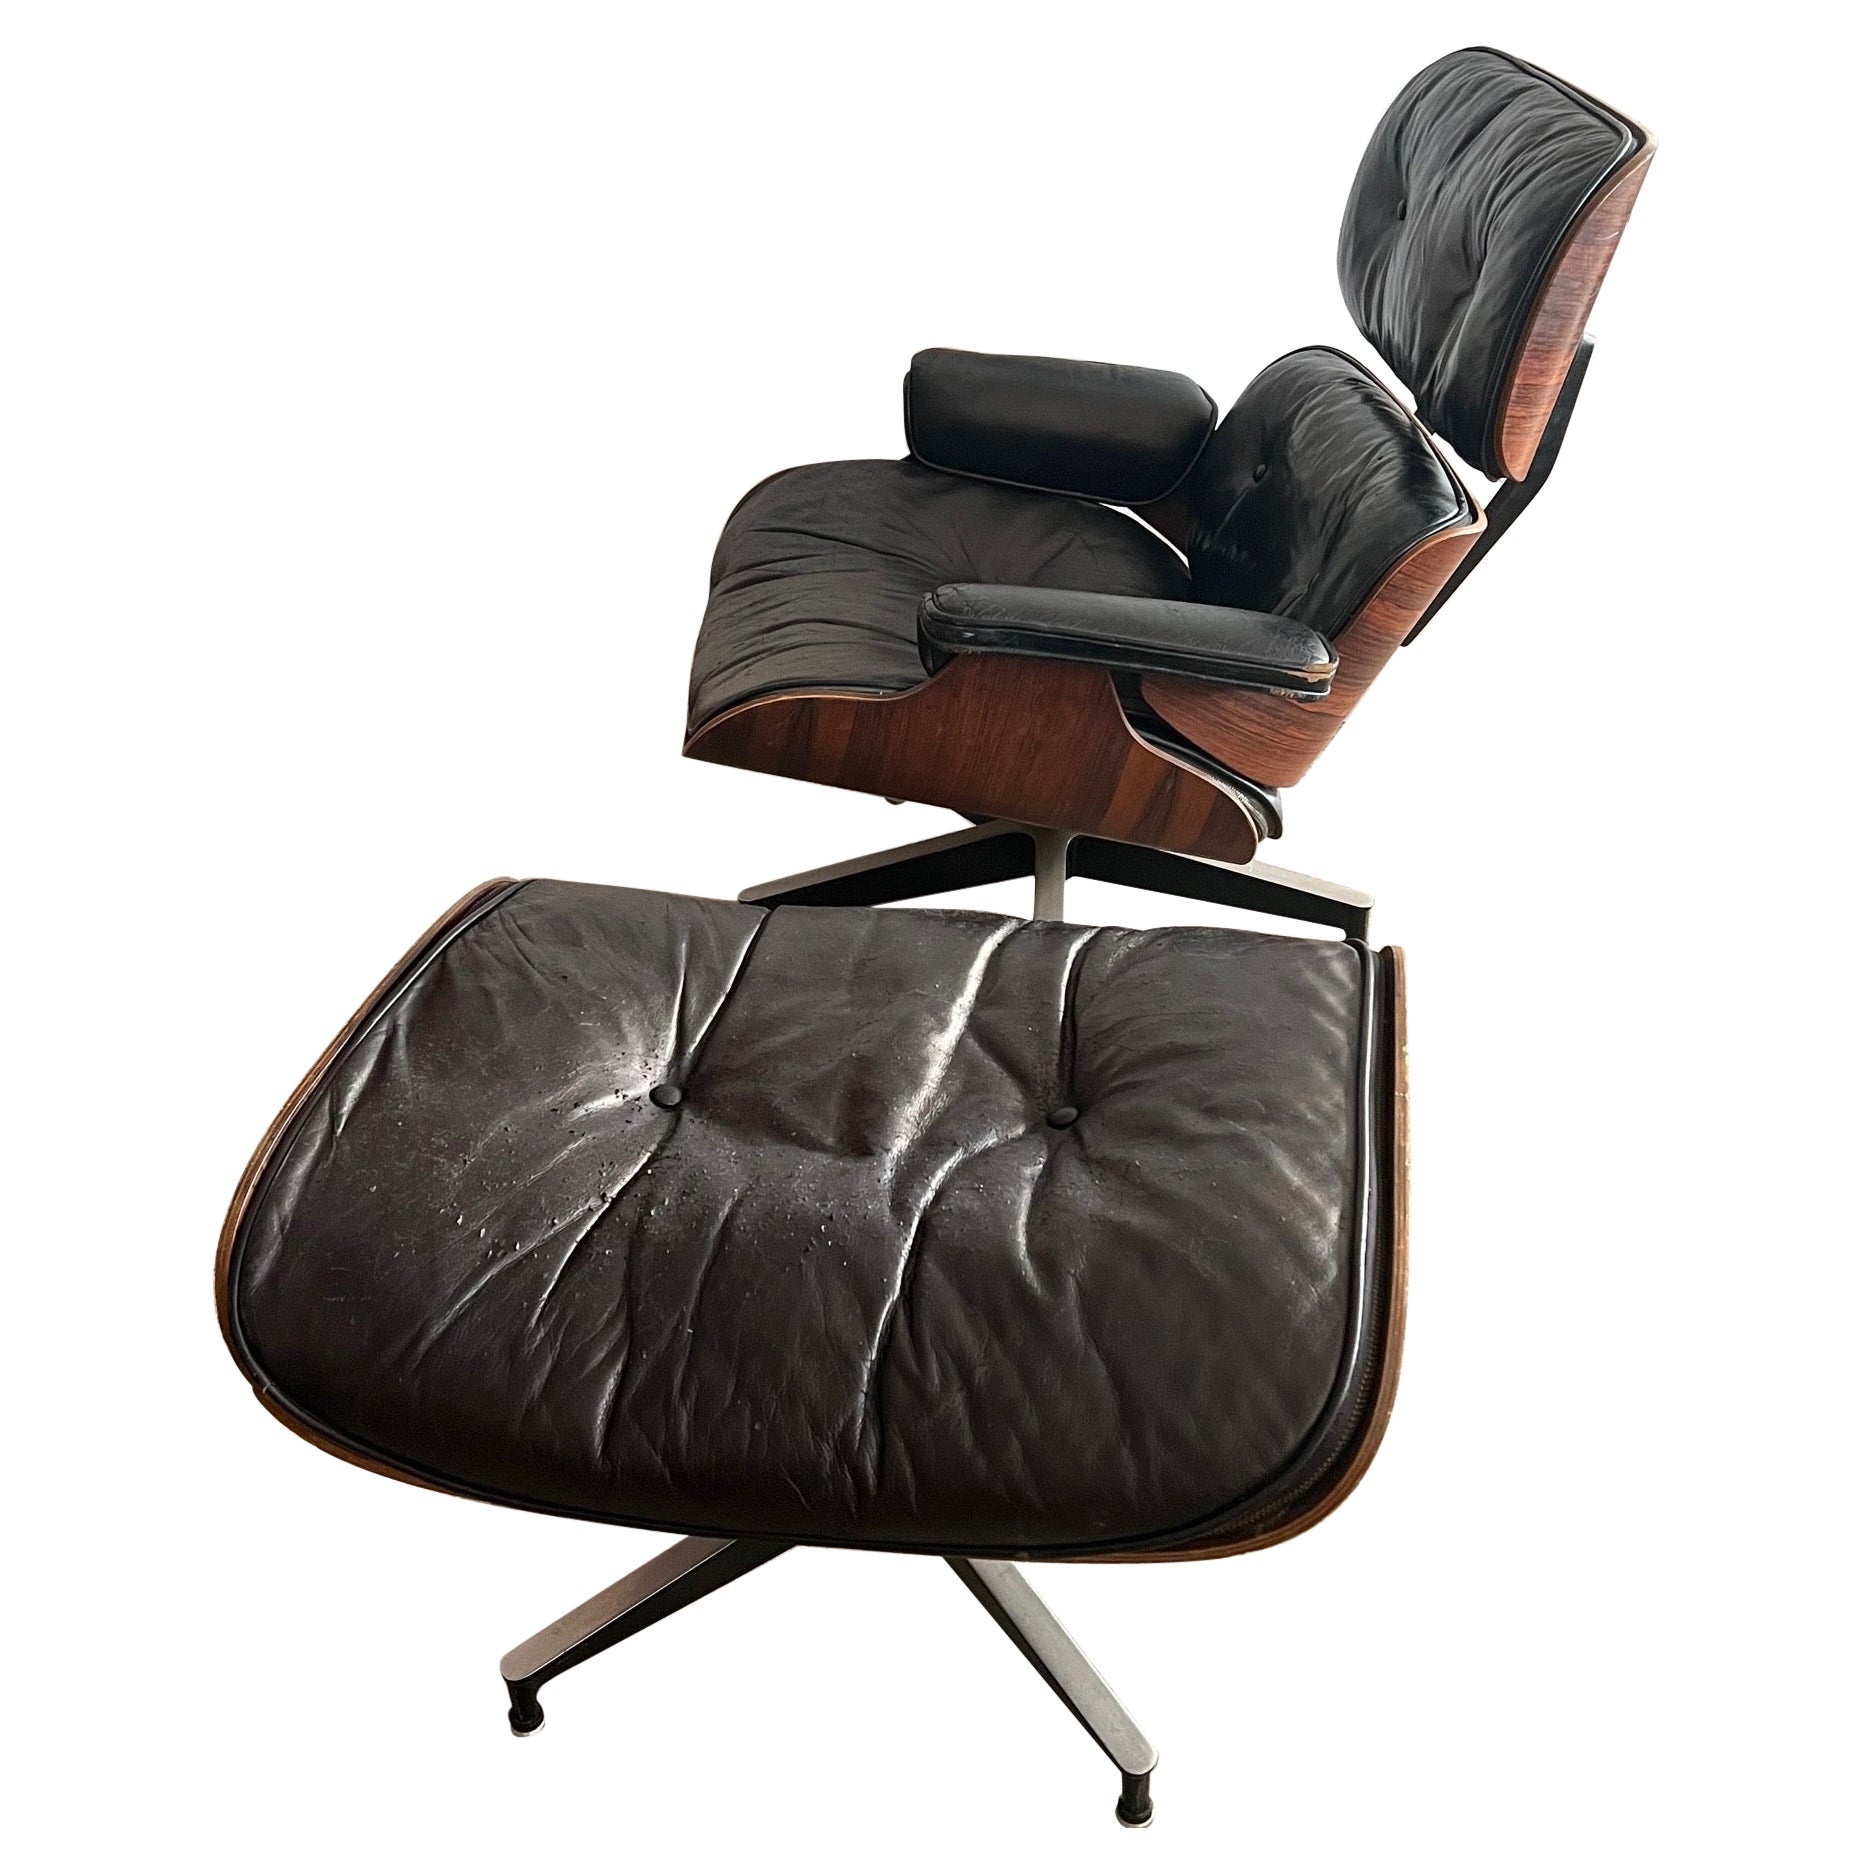 Charles Eames Herman Miller Lounge Chair and Ottoman, 1960's